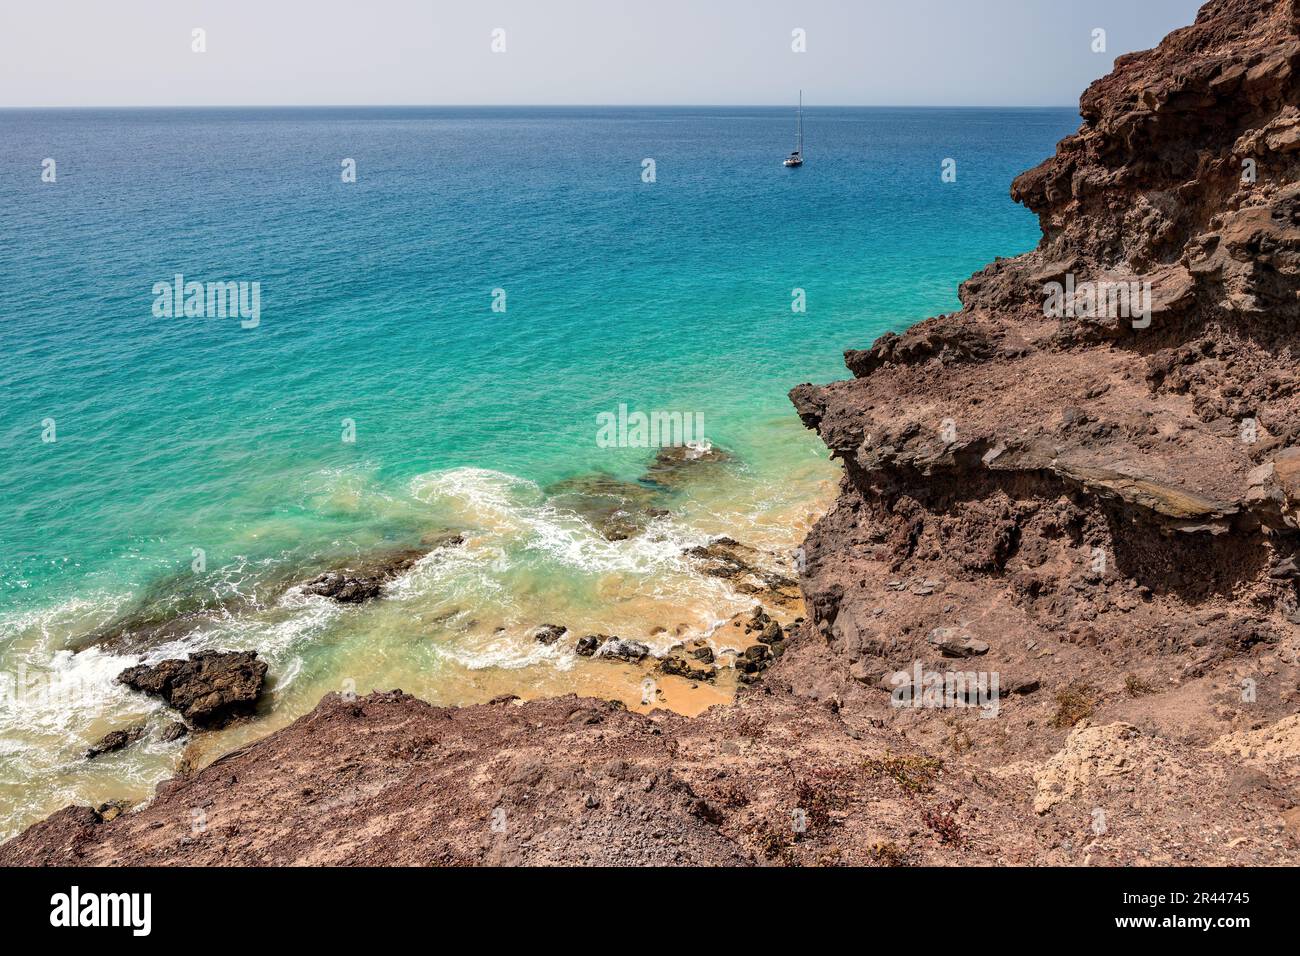 Rocks and sea. Rocky coast with the turquoise waters of the Atlantic Ocean. Fuerteventura, Canary Islands, Spain. Stock Photo